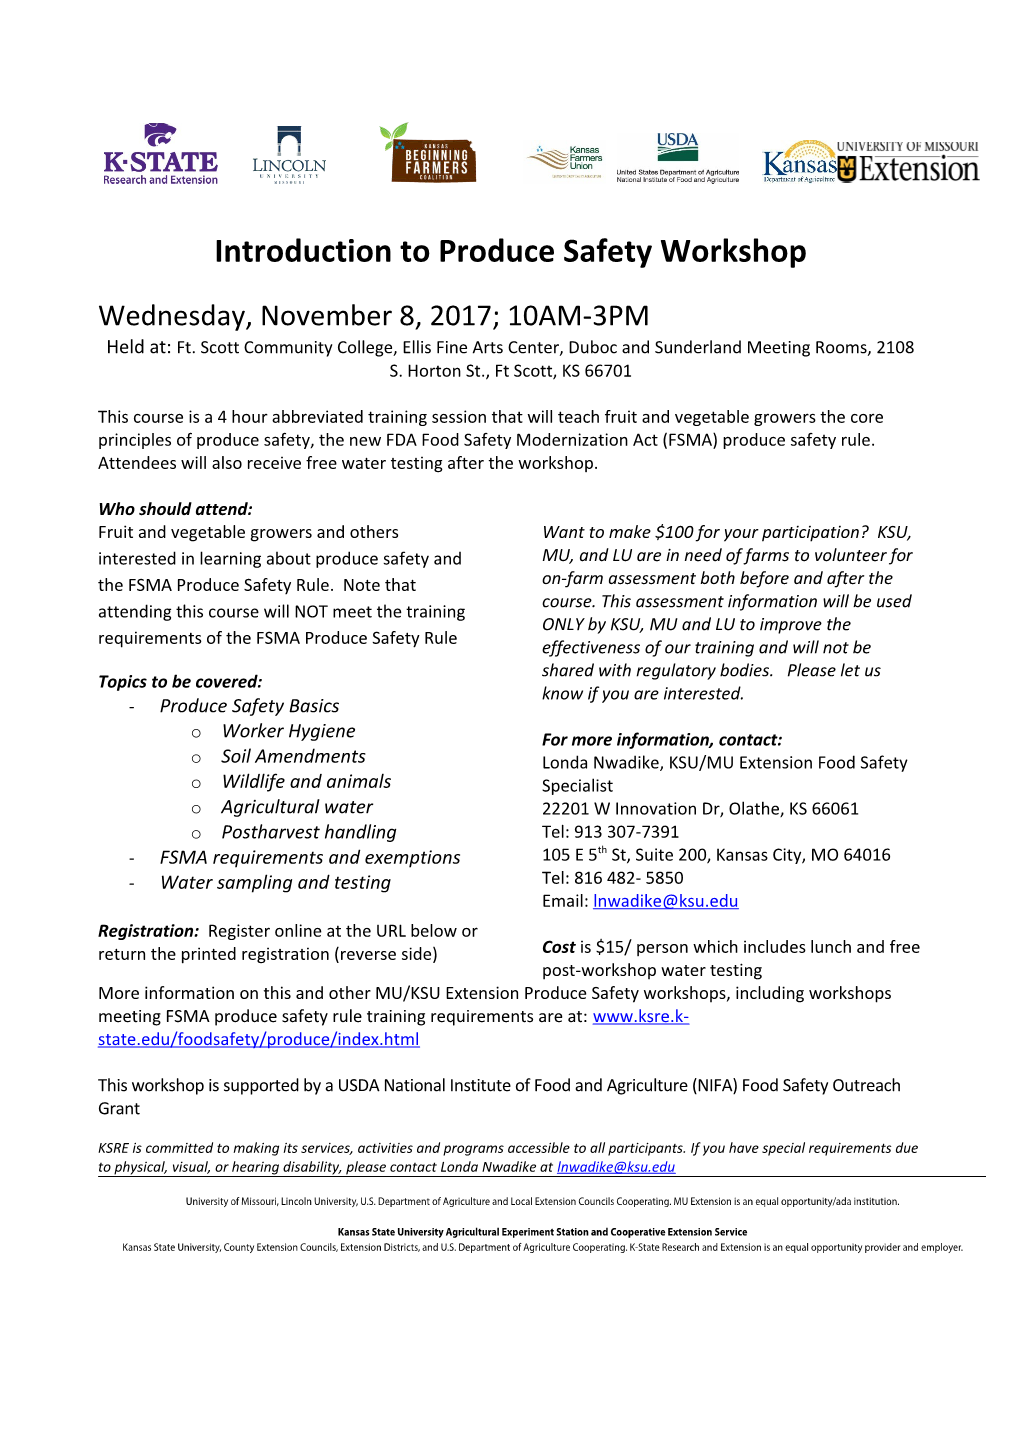 Introduction to Produce Safety Workshop